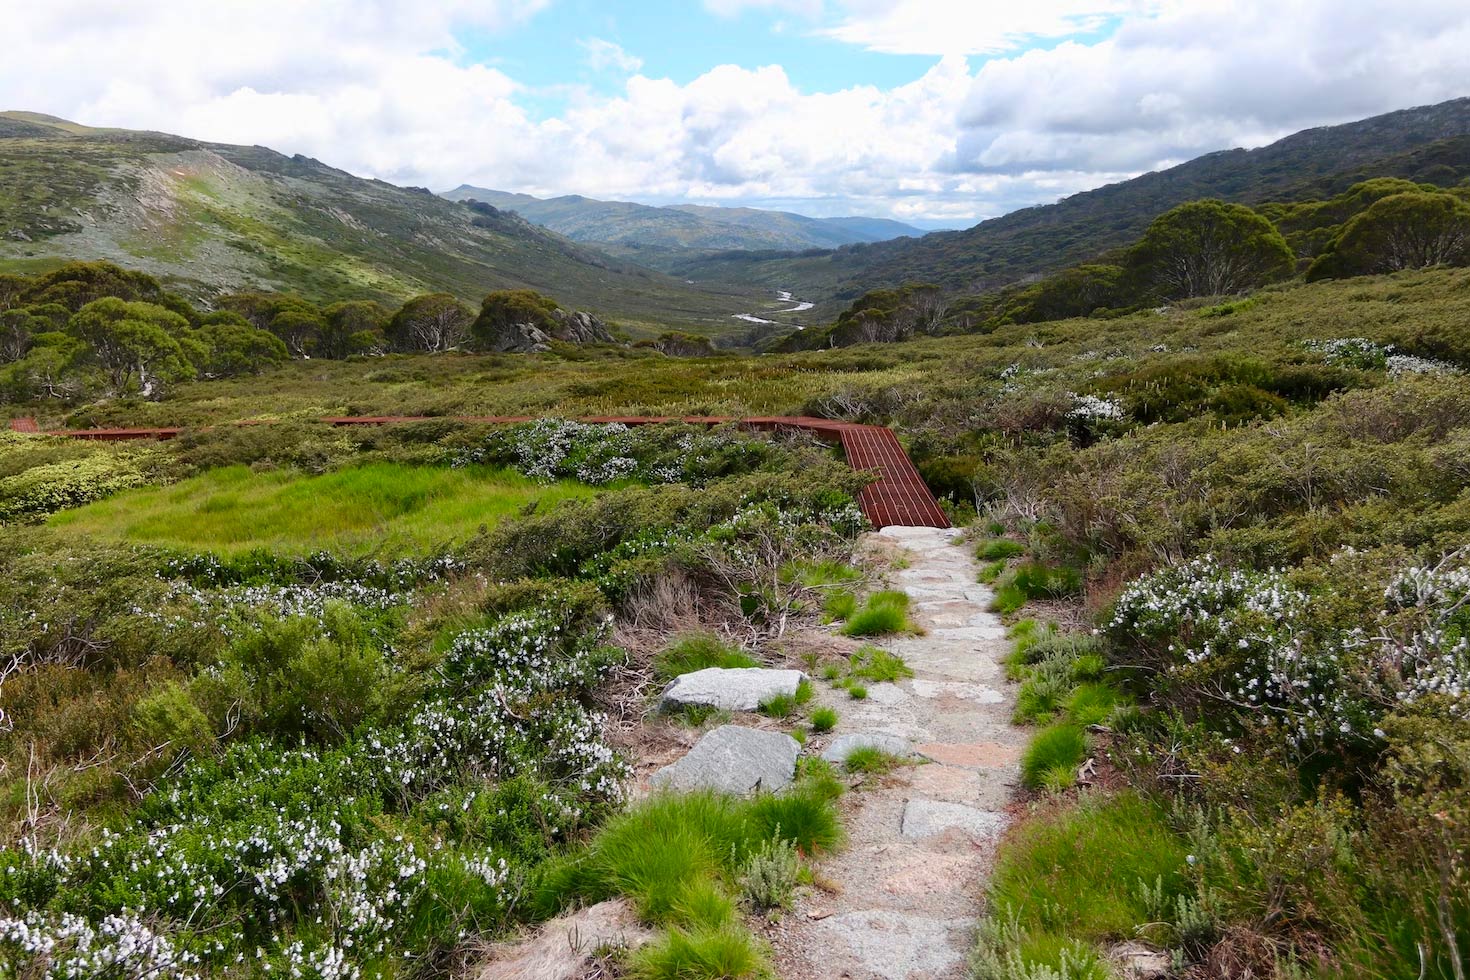 Scaling the Heights: An Expedition Up Mount Kosciuszko